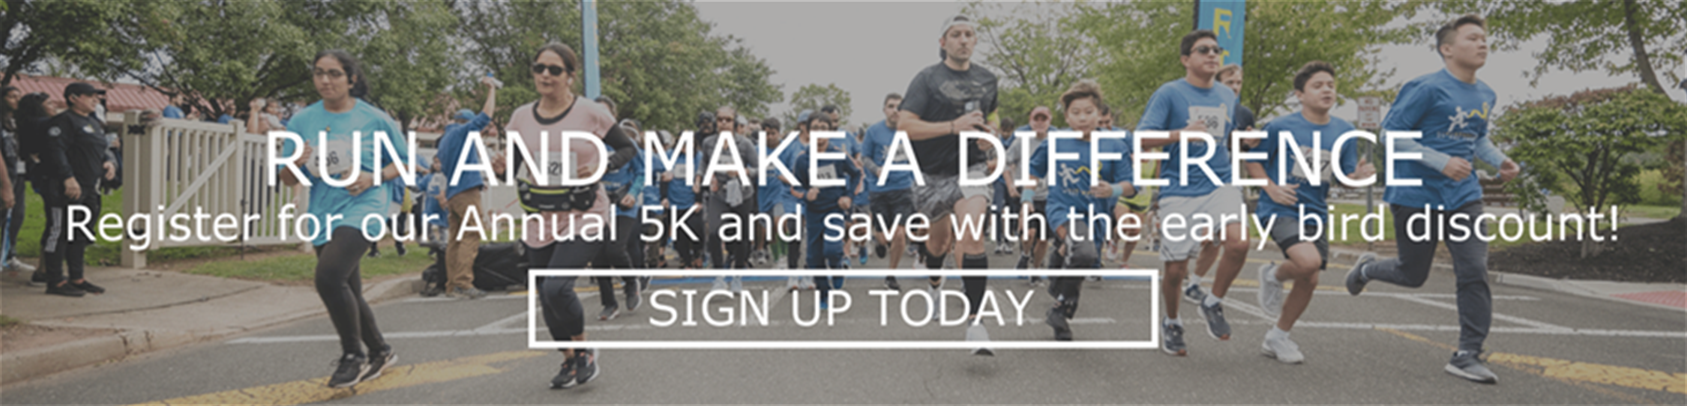 Run and Make a Difference. Register for our Annual 5K and save with the early bird discount. Sign up today.